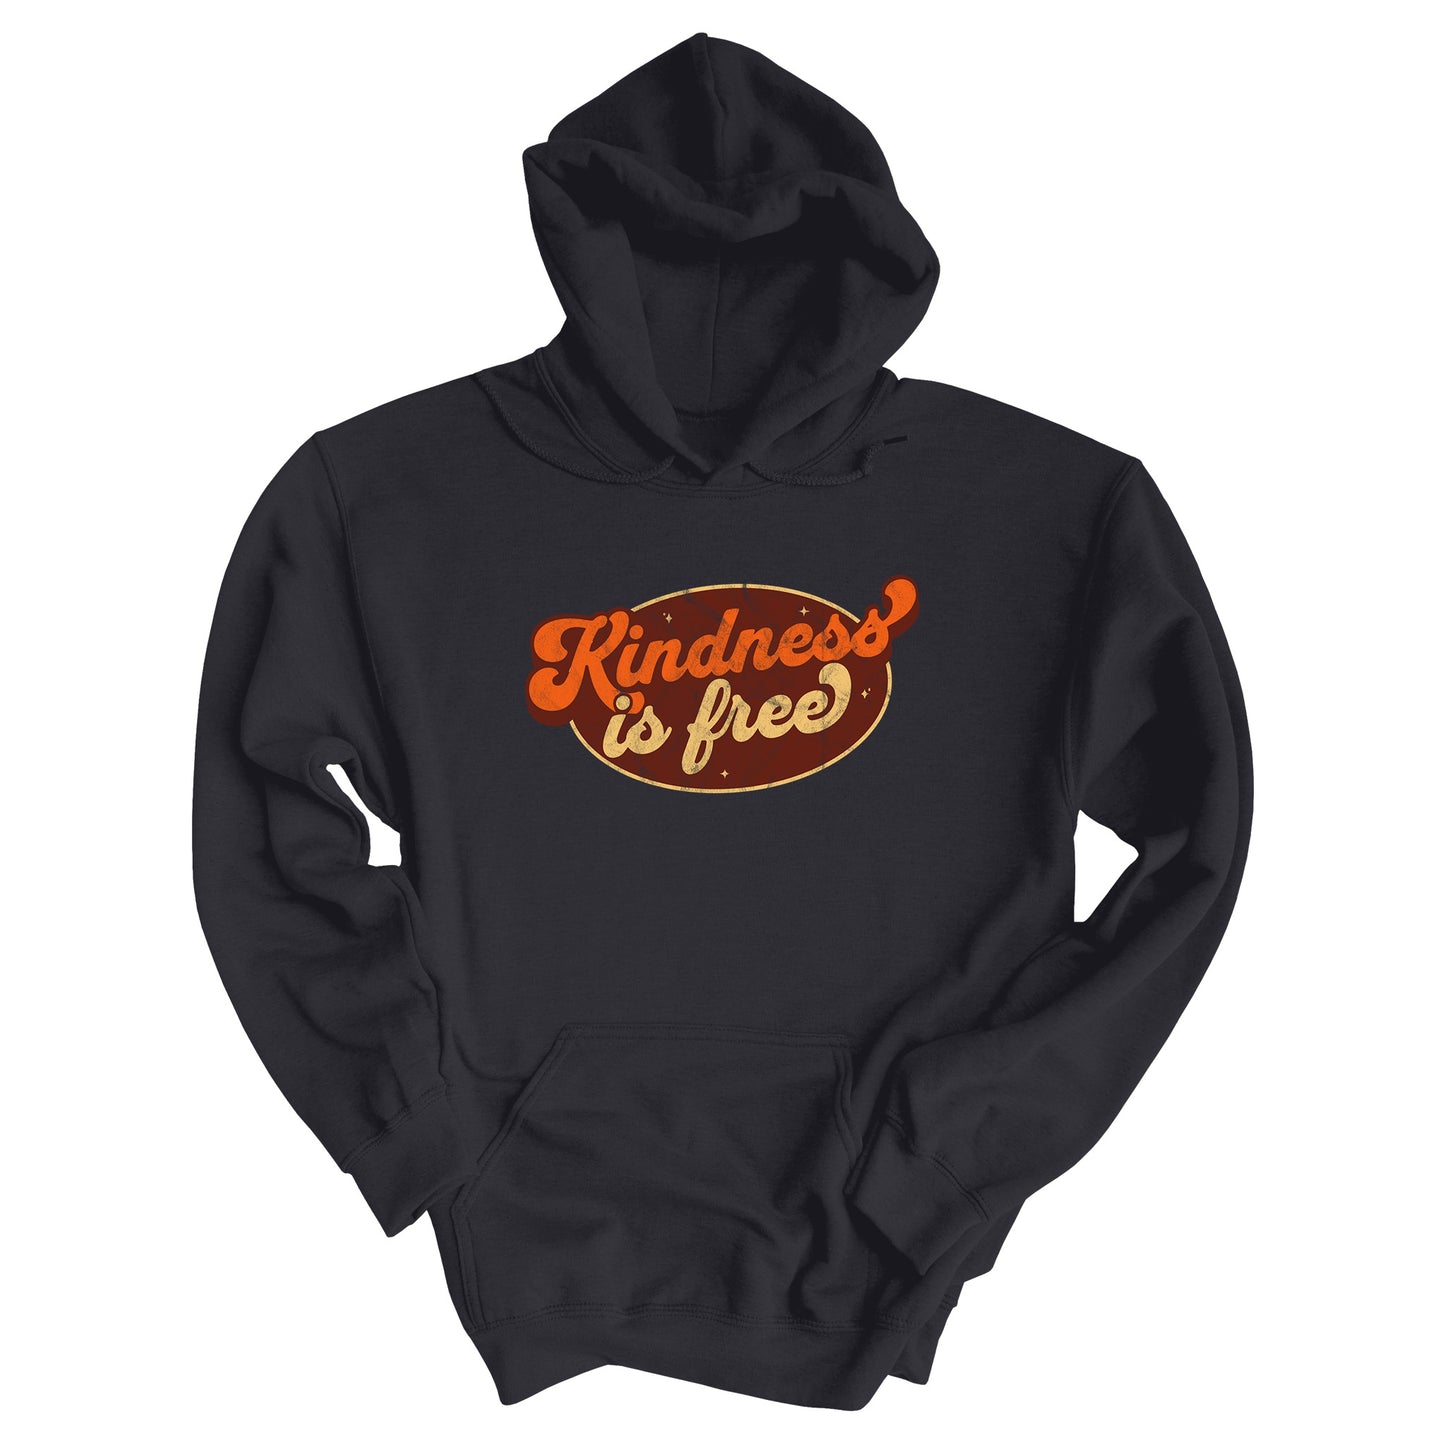 Charcoal color unisex hoodie with a retro graphic that says “Kindness is free.” The text is in a script font with a brown oval behind it. The “k” and the “s” in the word “Kindness” are not contained inside the oval. The graphic is also distressed to add to the retro feel.